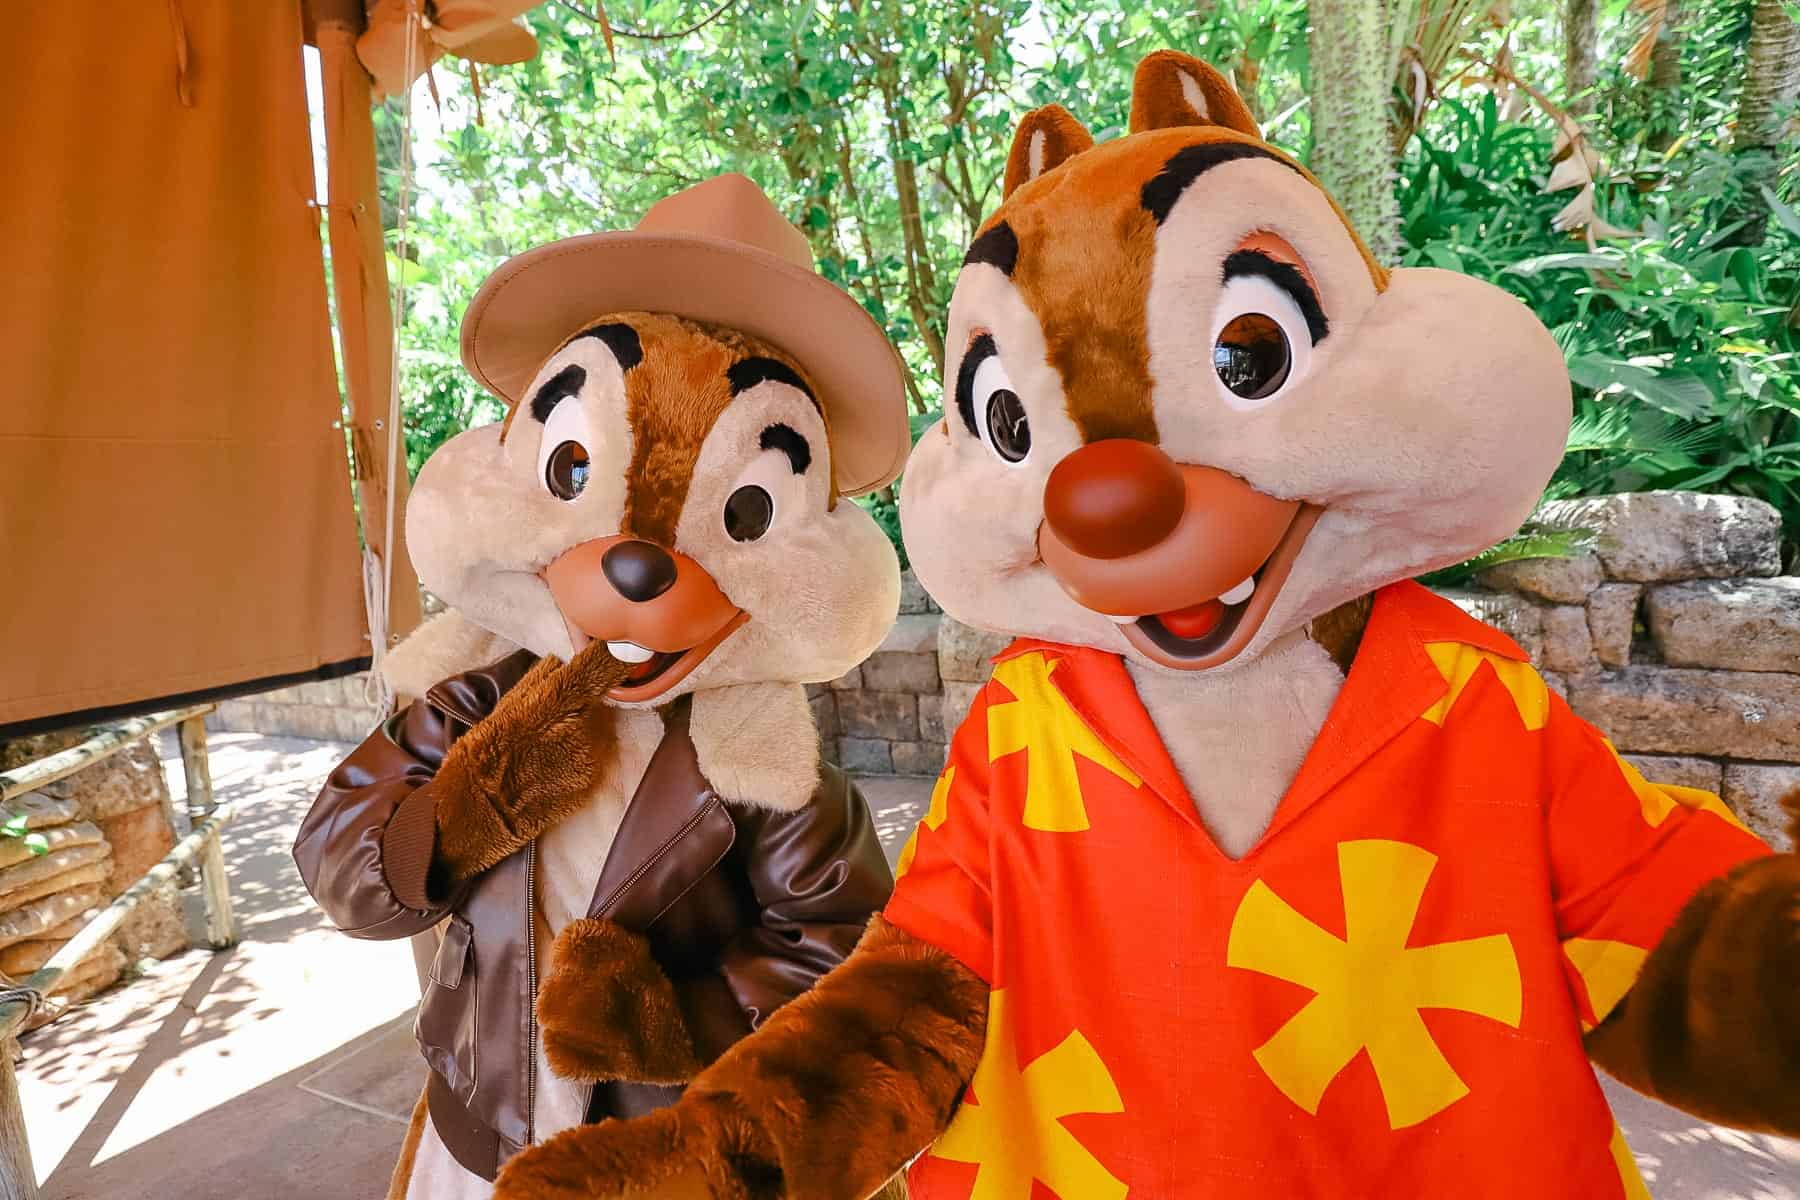 Chip and Dale dressed in brown leather jacket and a bright red shirt with yellow stars. 